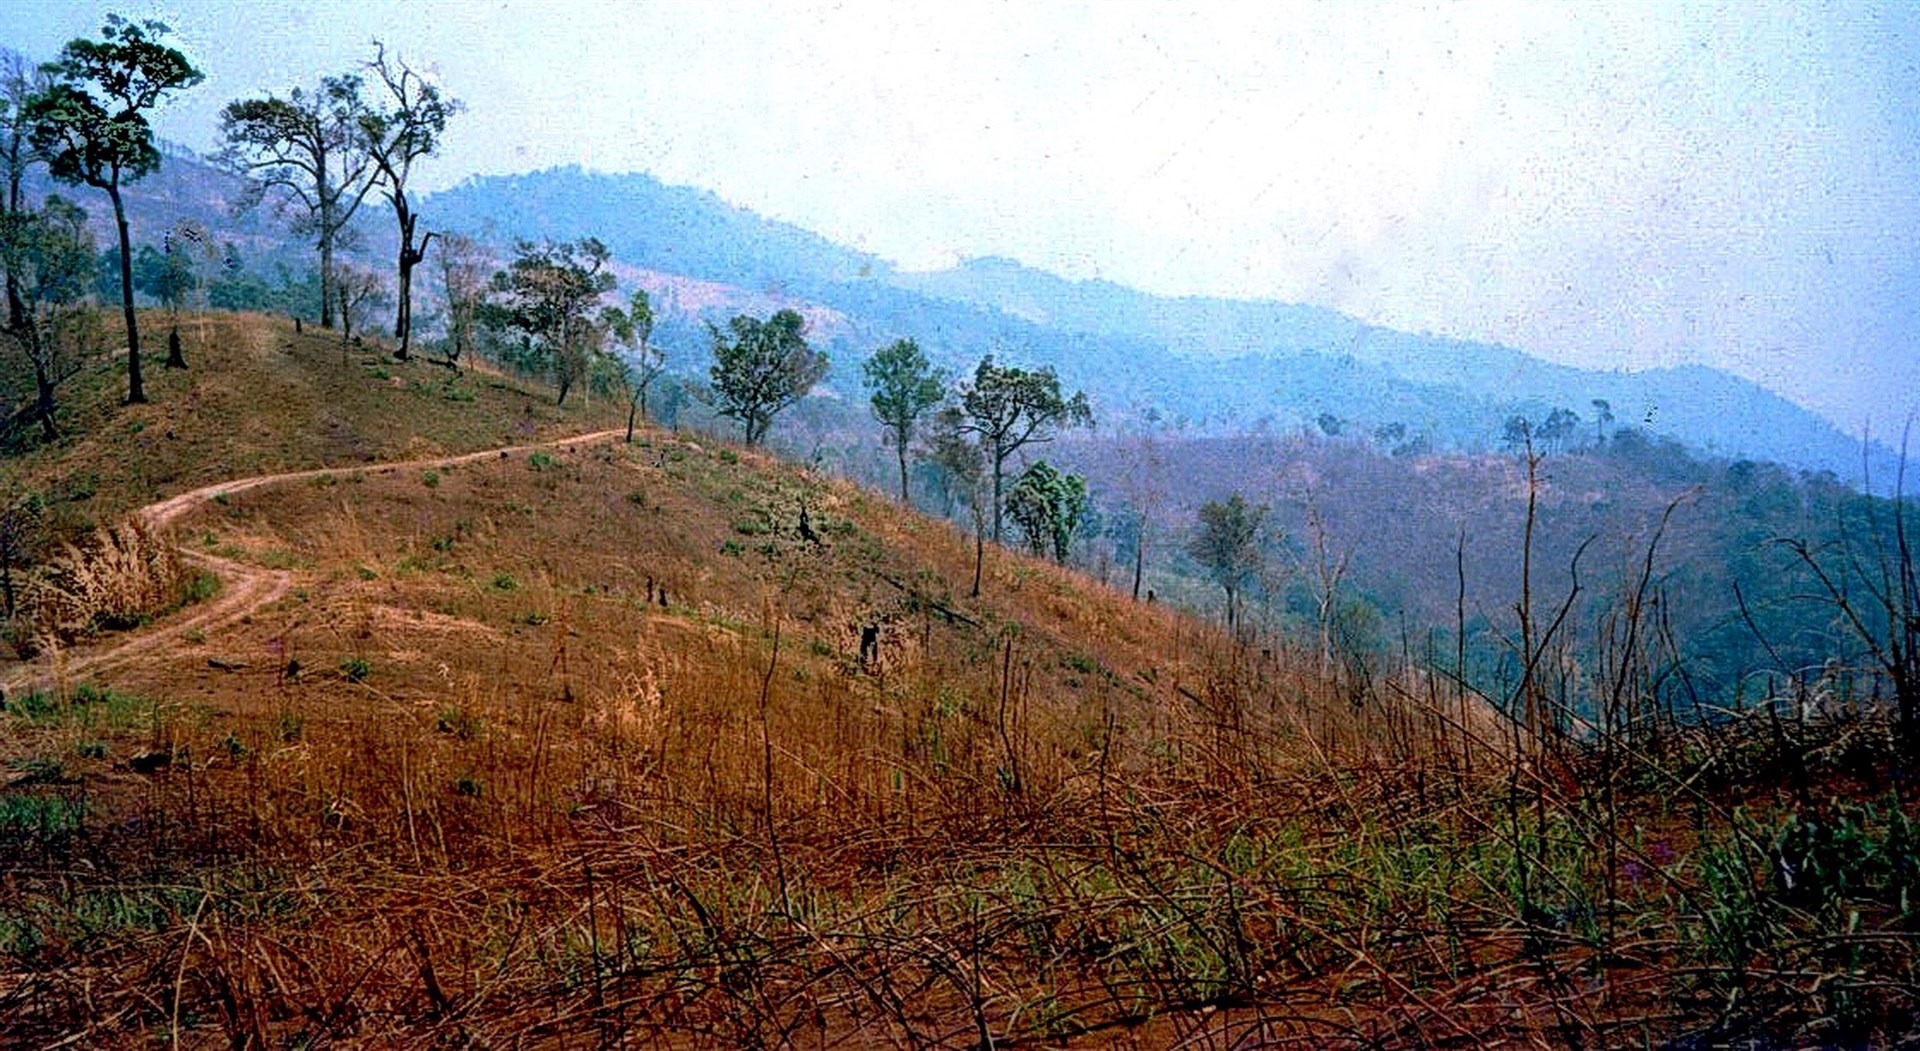 A forest area in Thailand before restoration (Stephen Elliott, Forest Restoration Research Unit, Chiang Mai University, Thailand/PA)